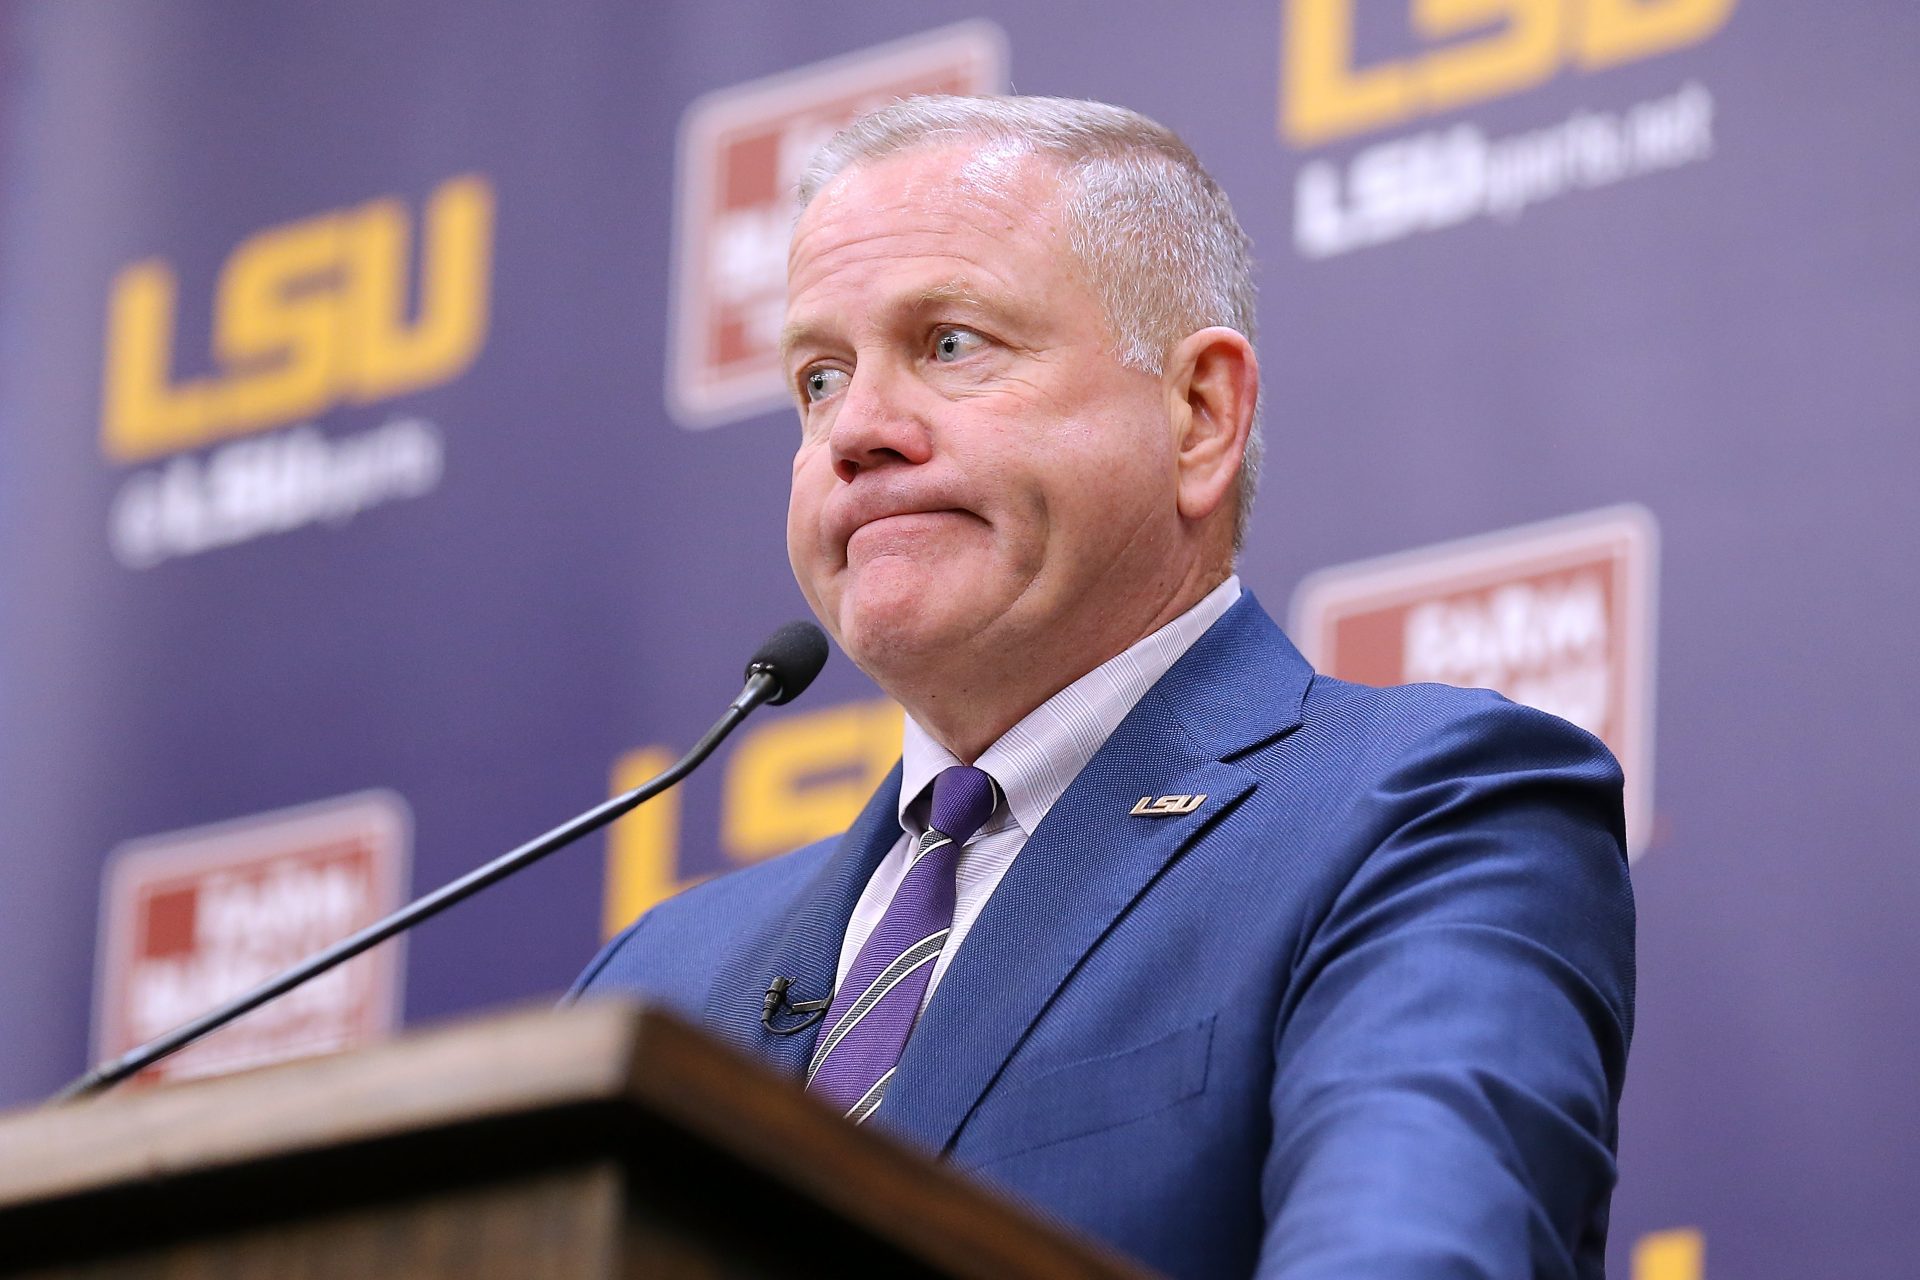 Brian Kelly leads the Tigers